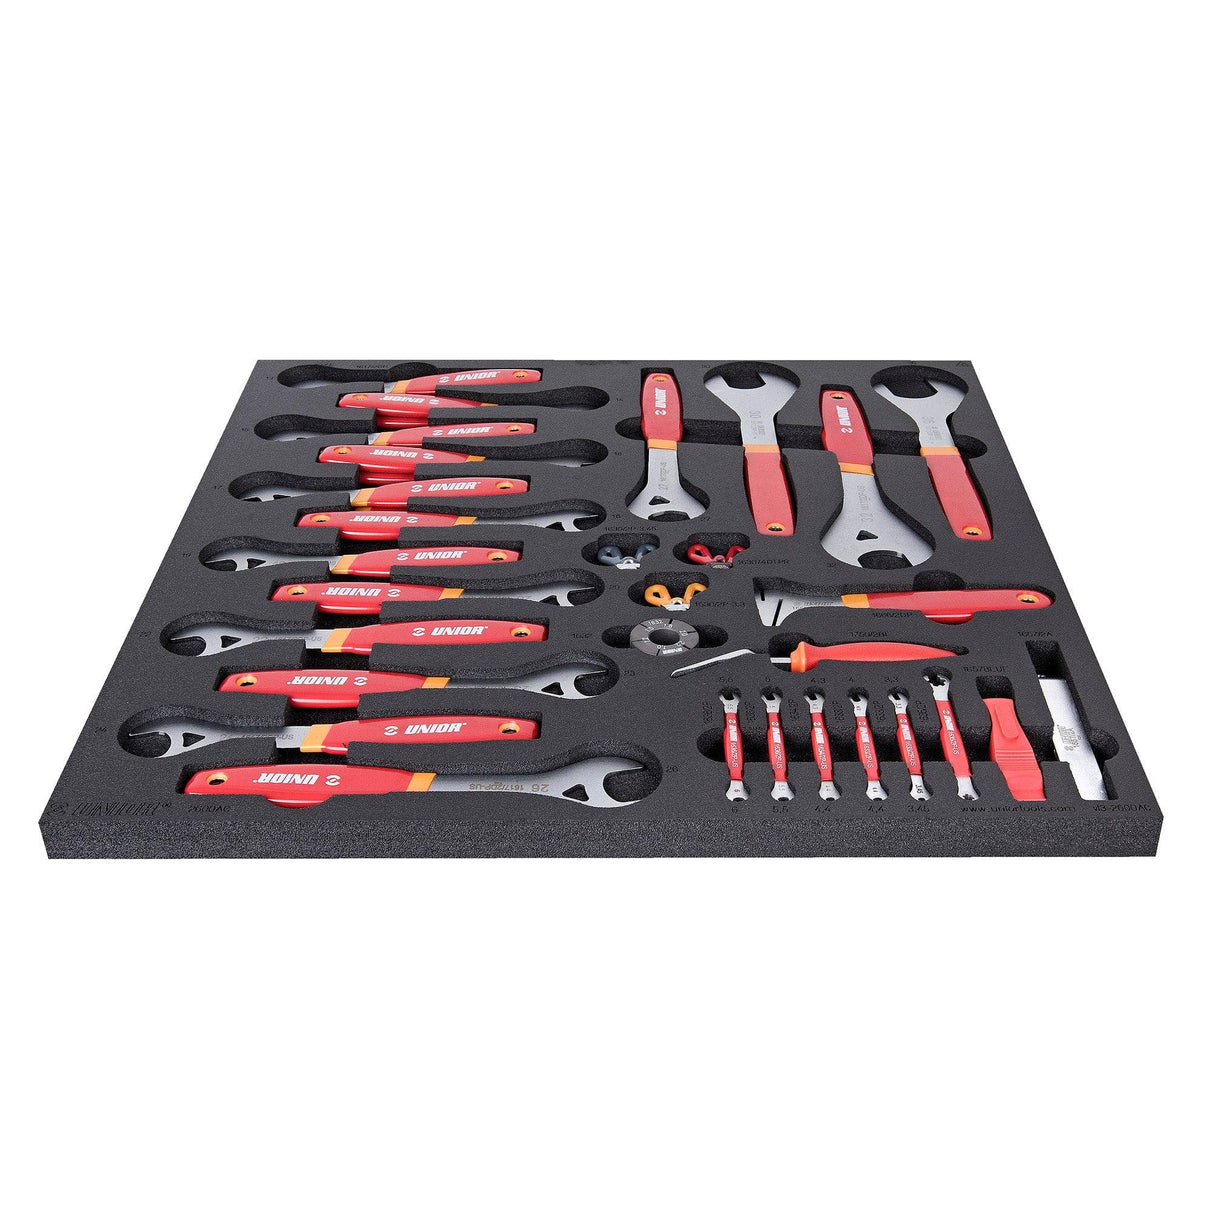 Unior Set Of Tools In Tray 3 For 2600A And 2600C-Drivetrain Tools: Red